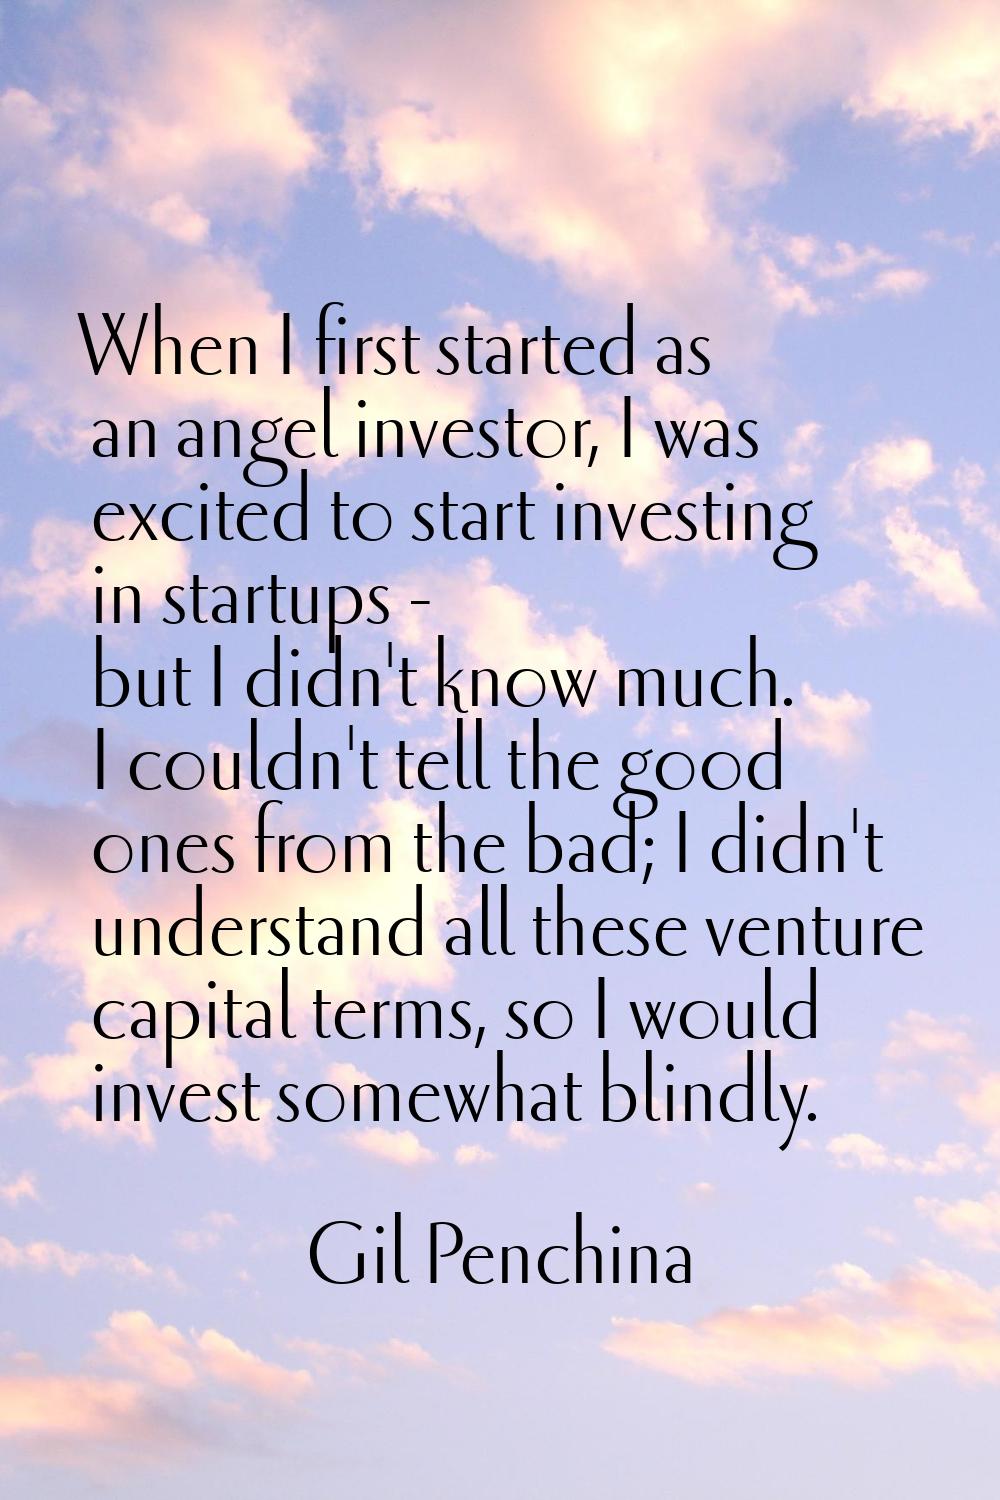 When I first started as an angel investor, I was excited to start investing in startups - but I did